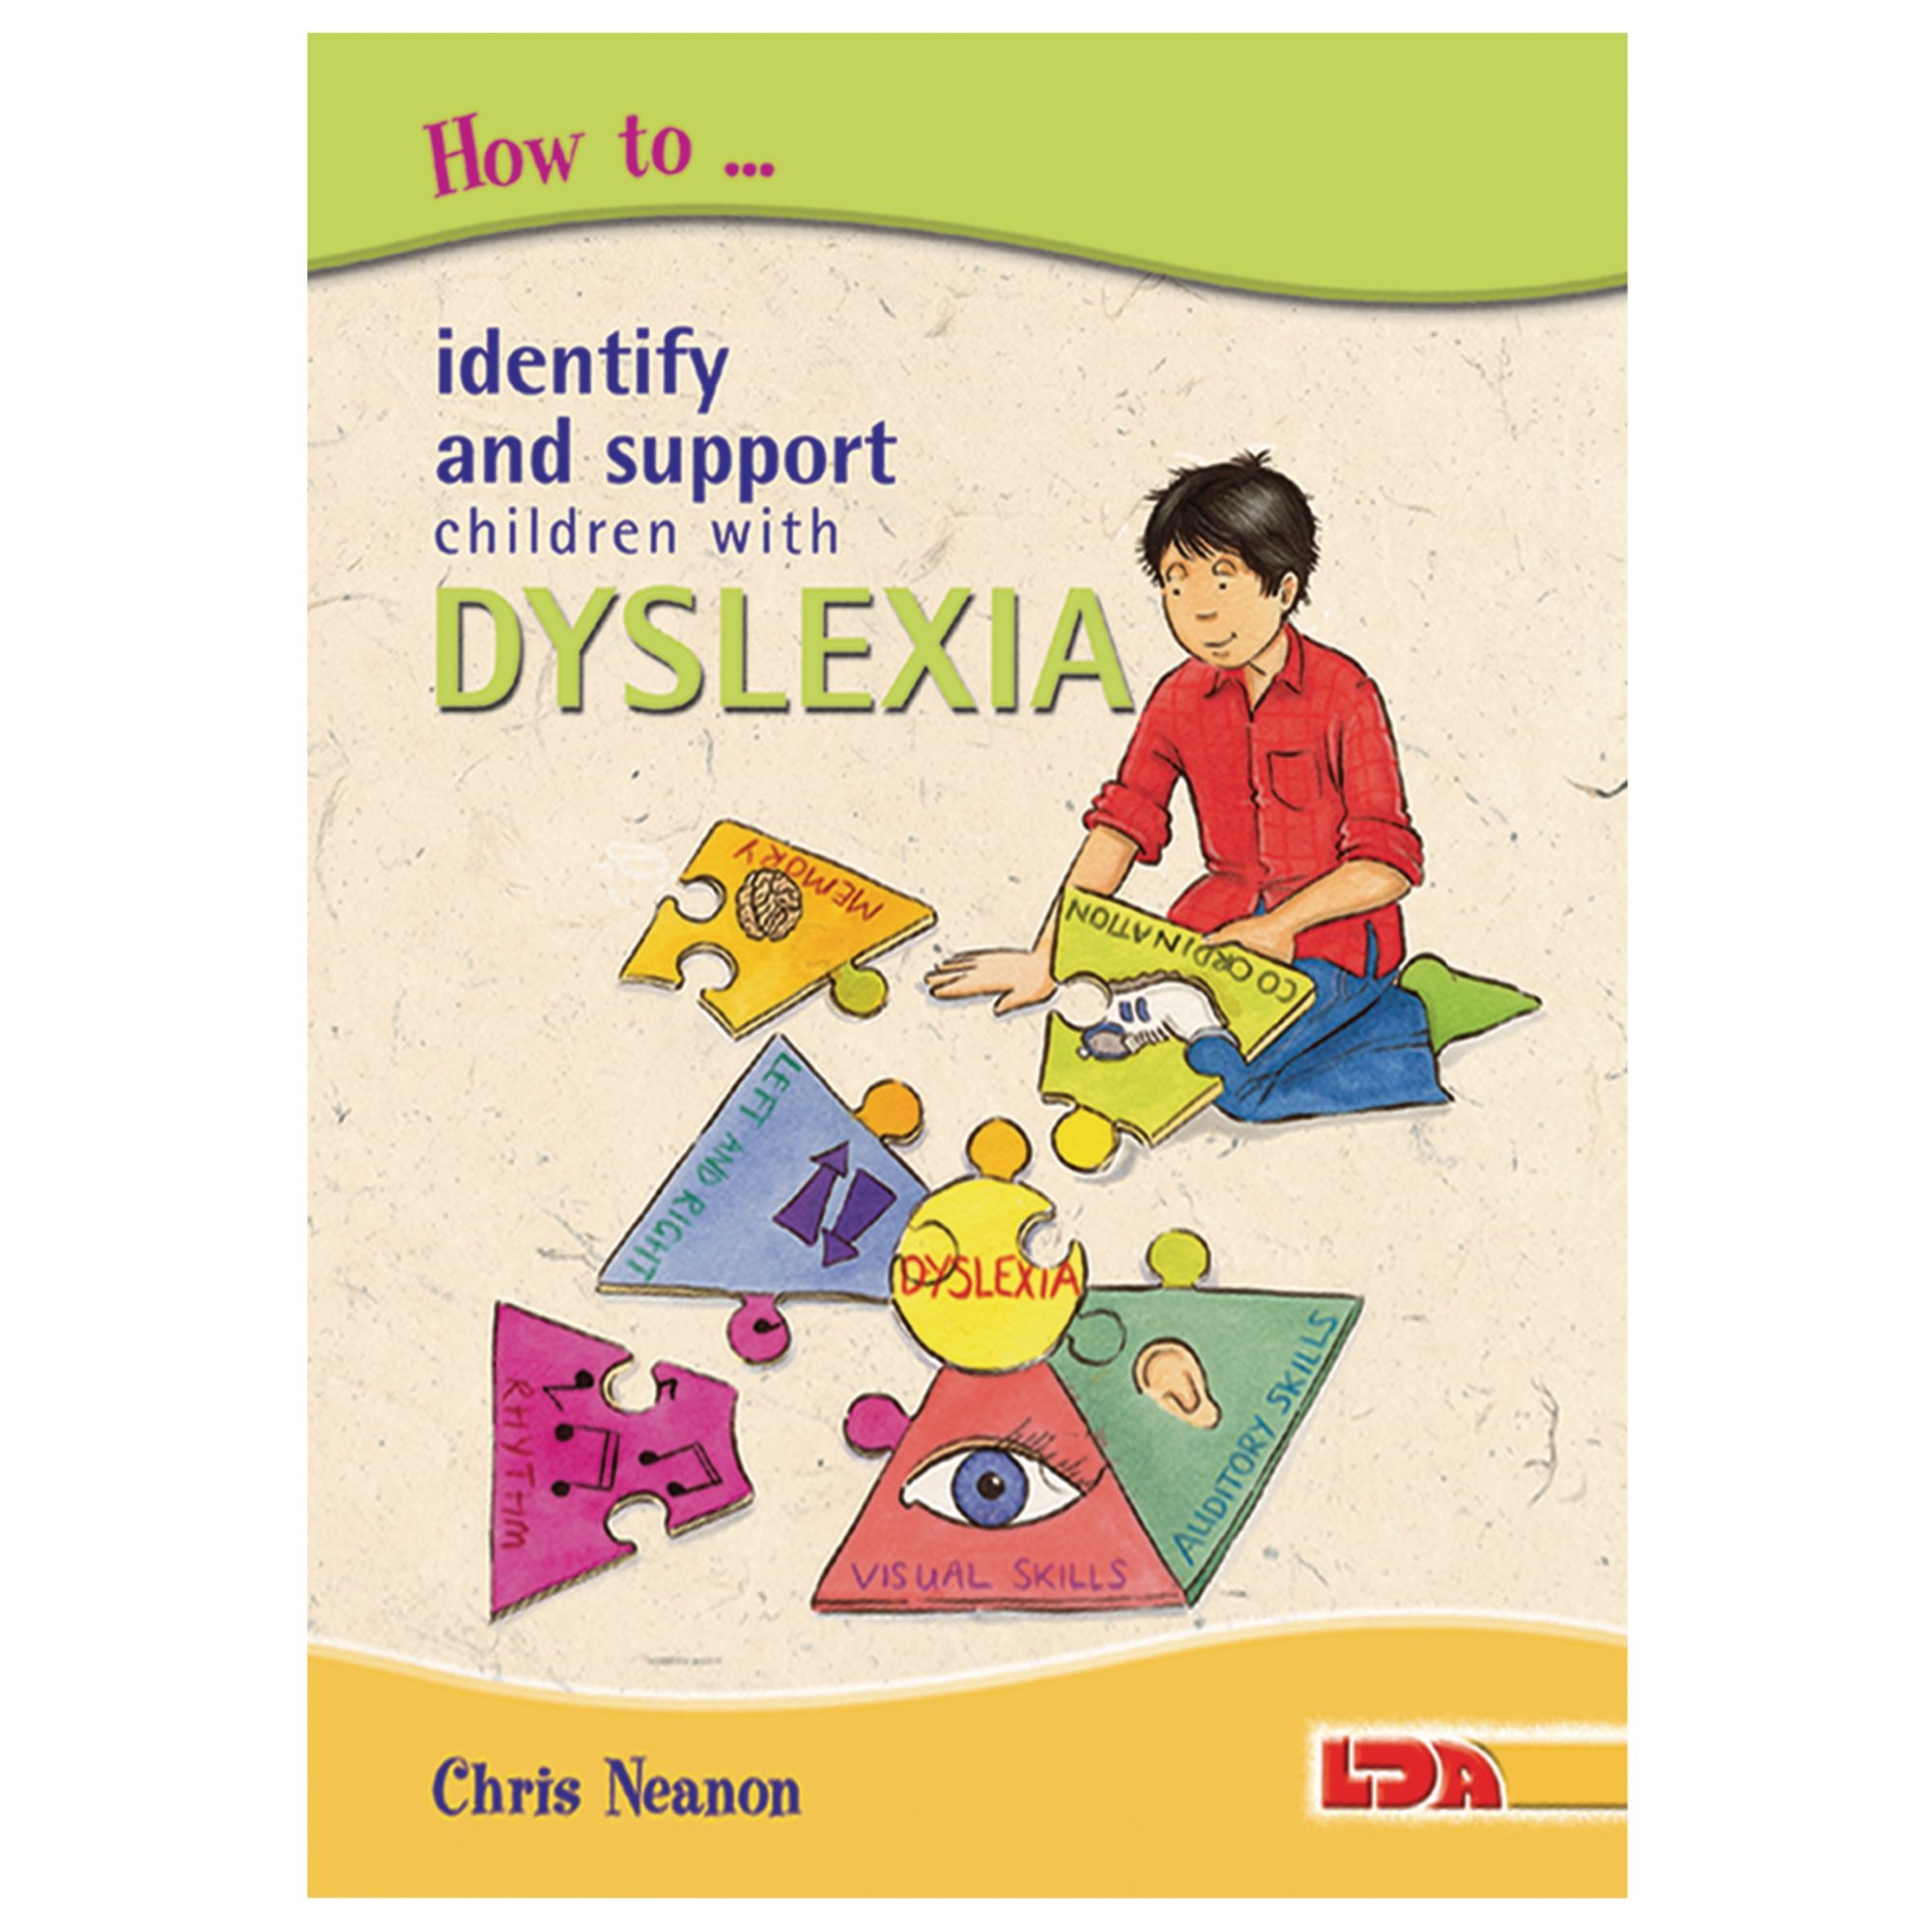 How to Identify and Support Children with Dyslexia